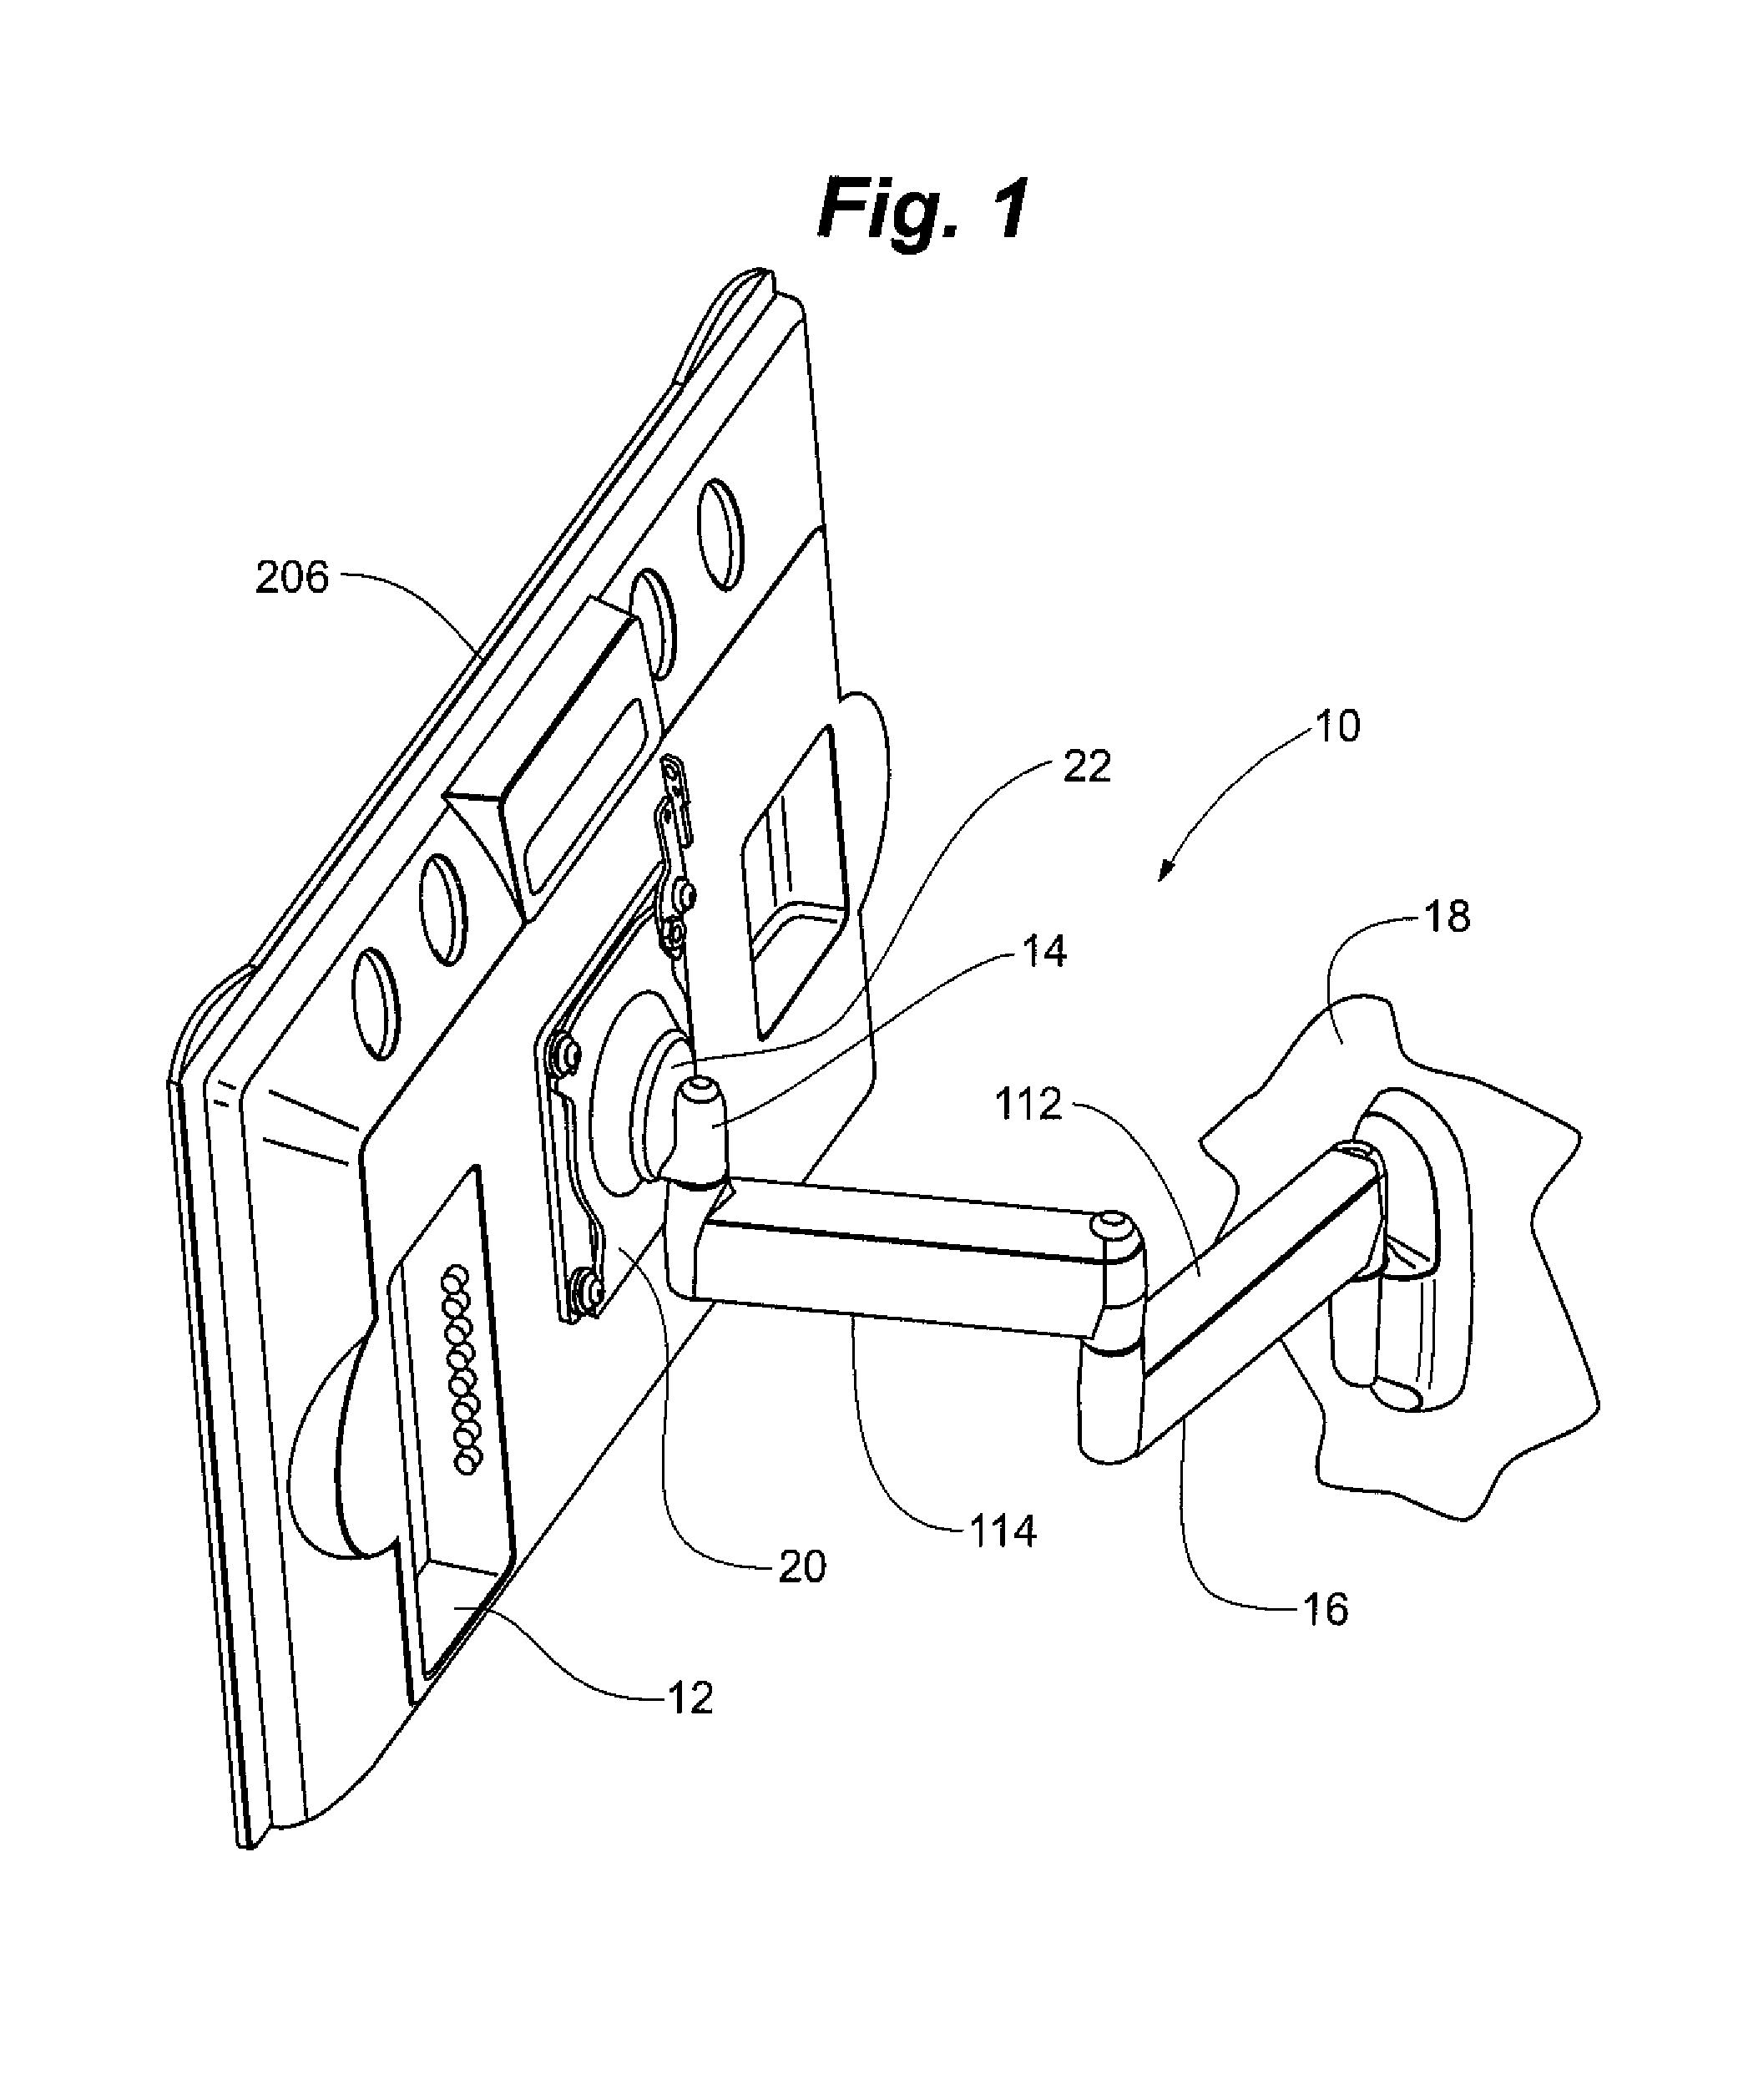 Self-balancing adjustable mounting system with friction adjustment